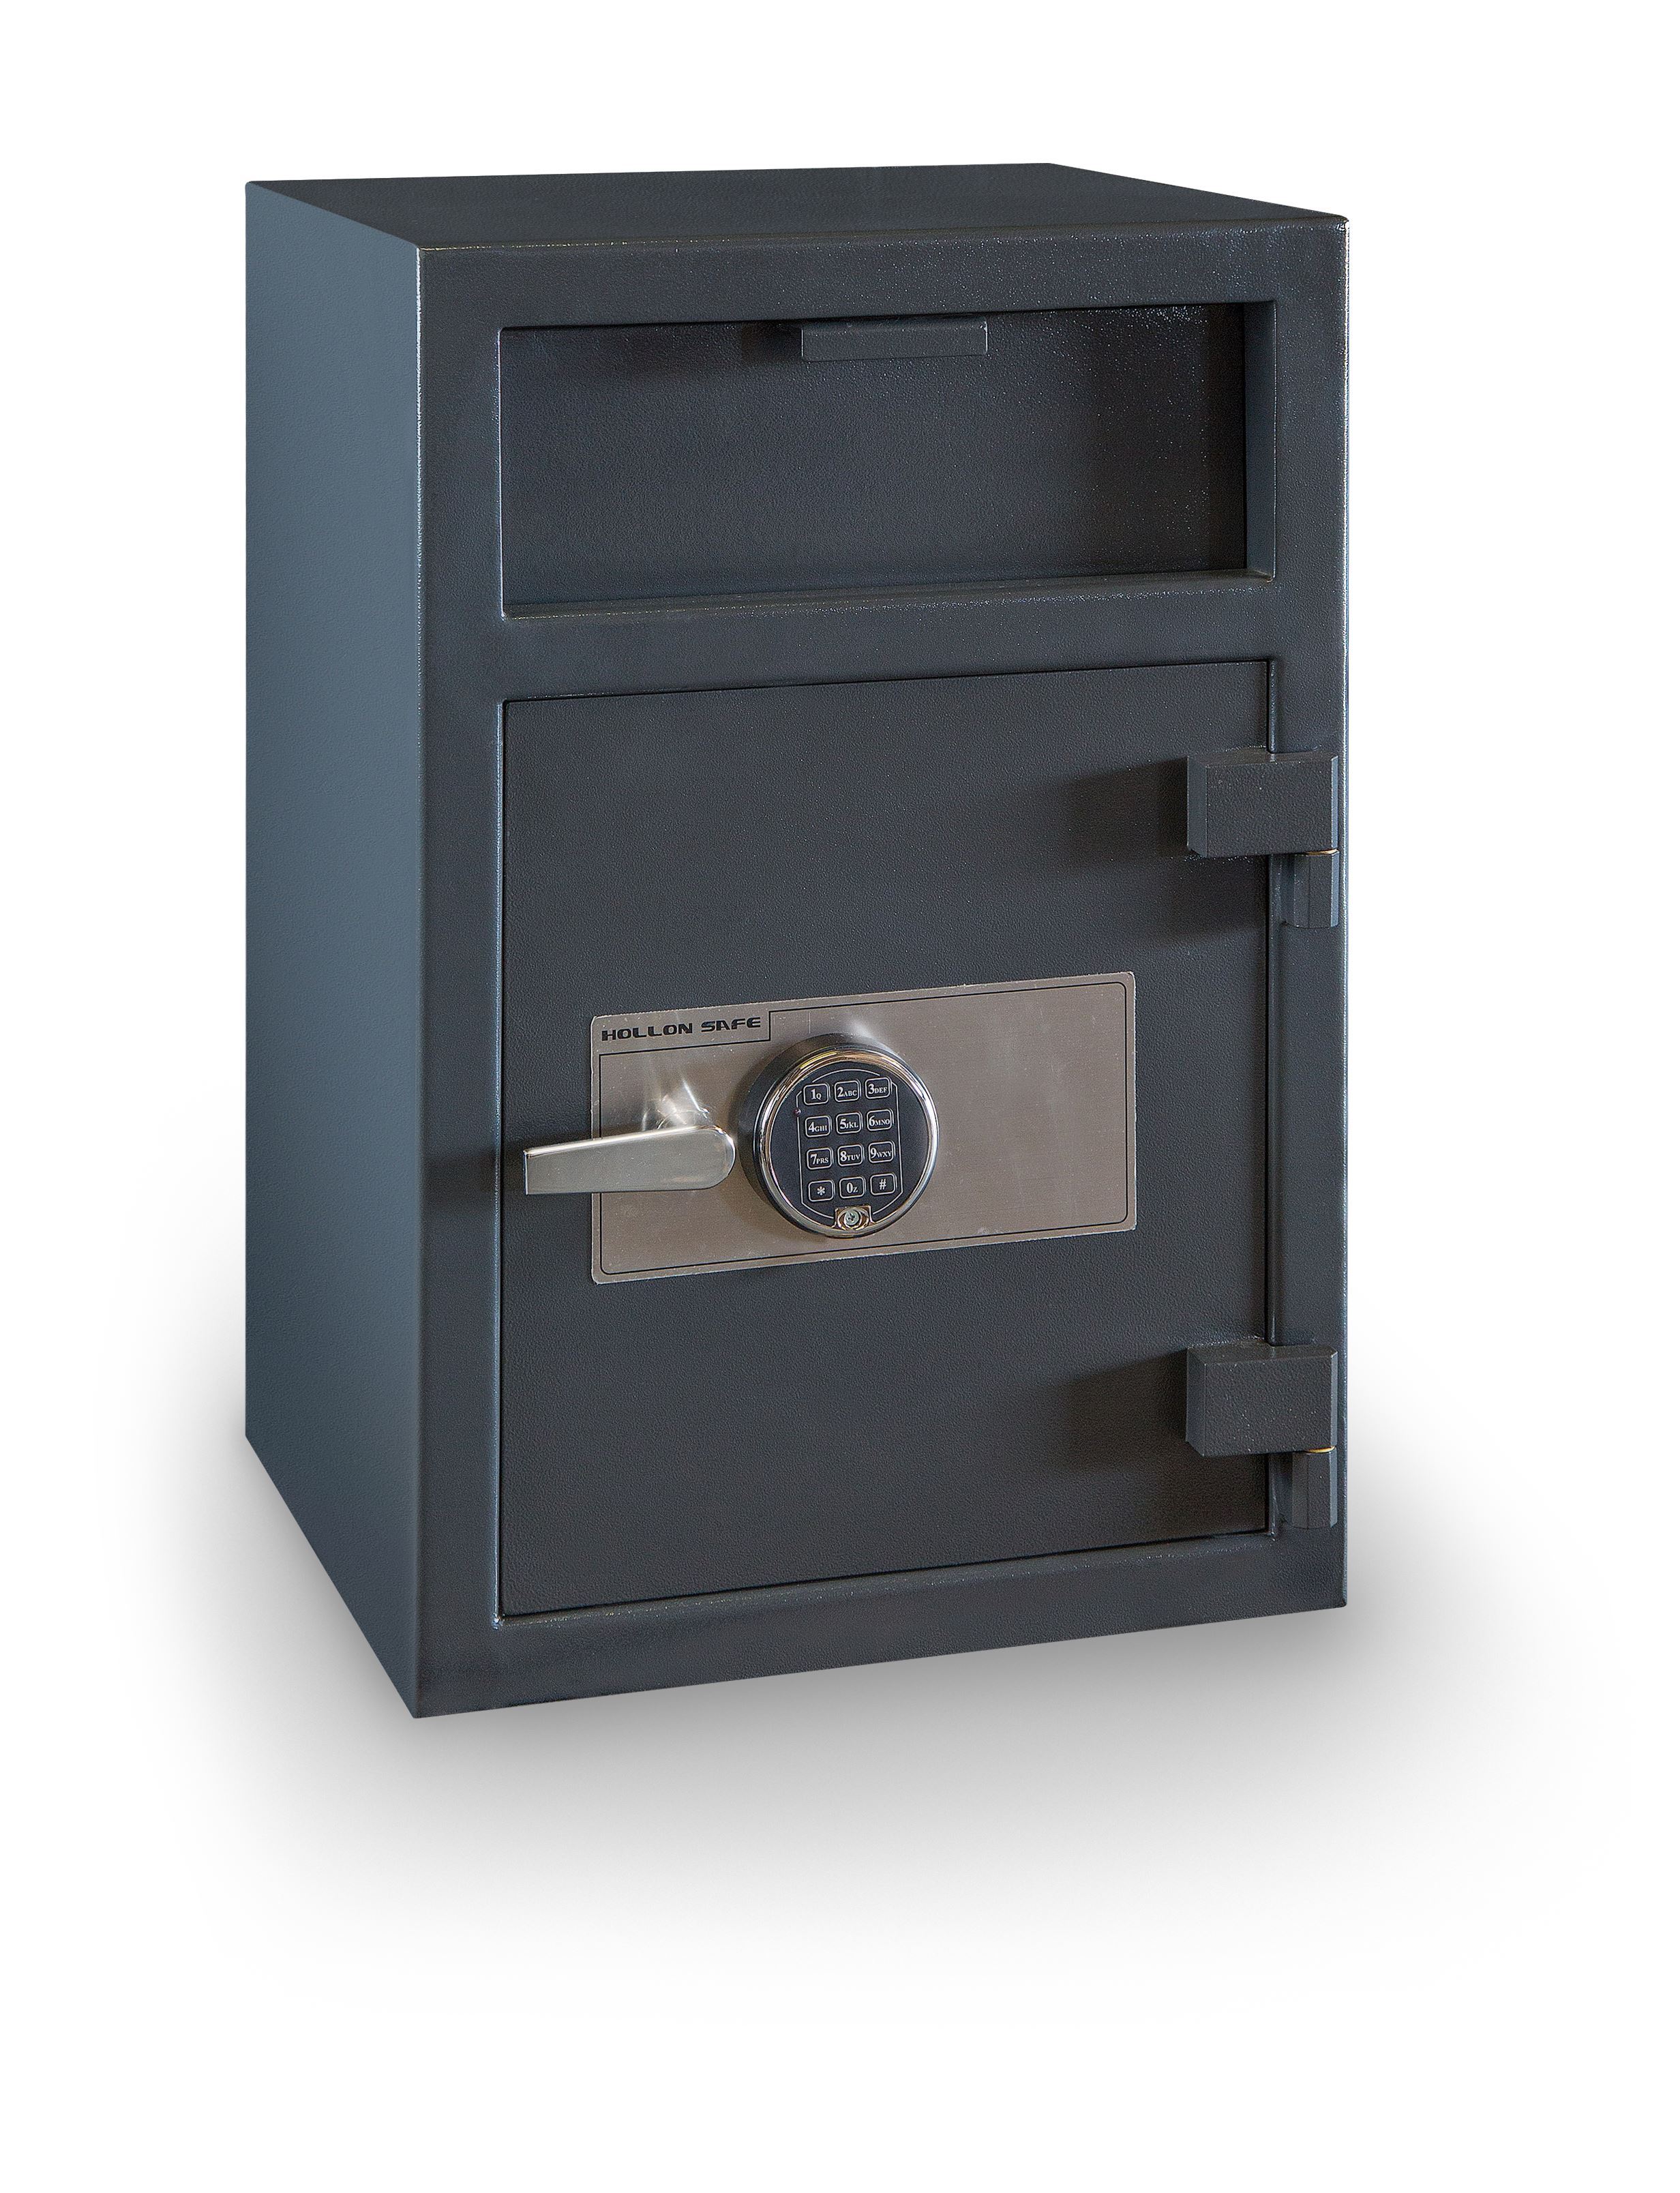 Security Safes - Depository Safe With Inner Locking Department - FD-3020EILK